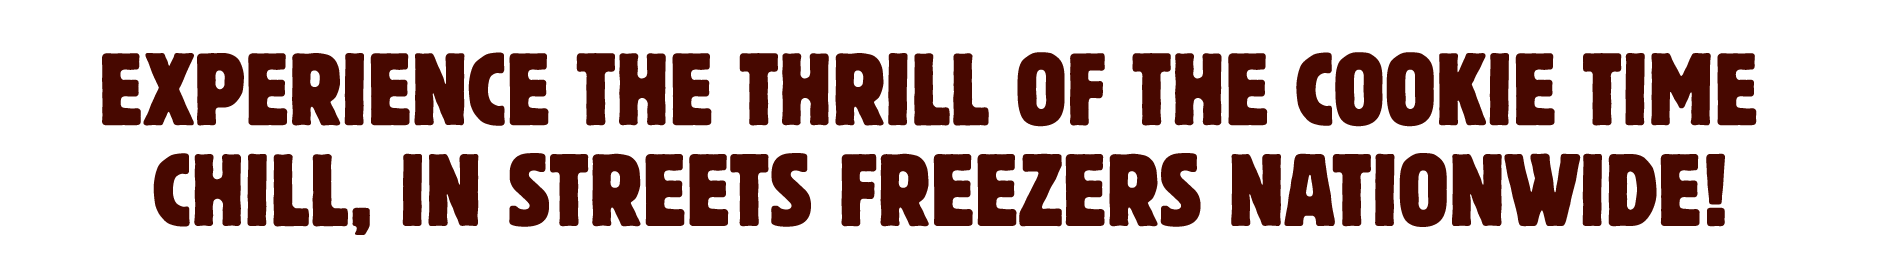 Experience the thrill of the Cookie Time chill, in streets freezers nationwide!